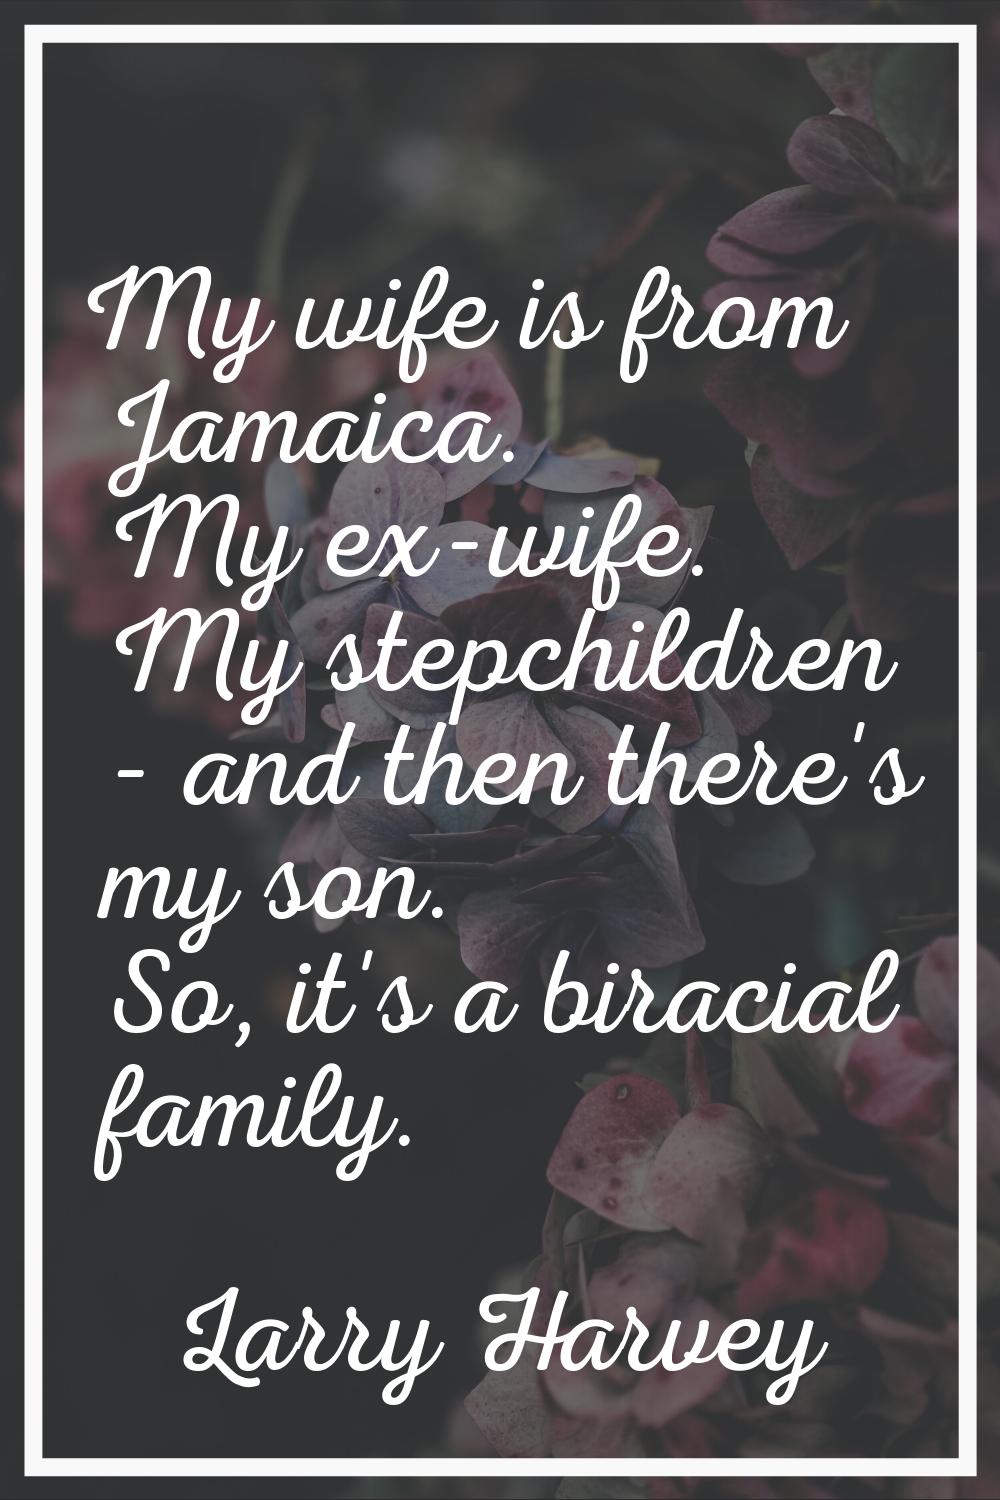 My wife is from Jamaica. My ex-wife. My stepchildren - and then there's my son. So, it's a biracial